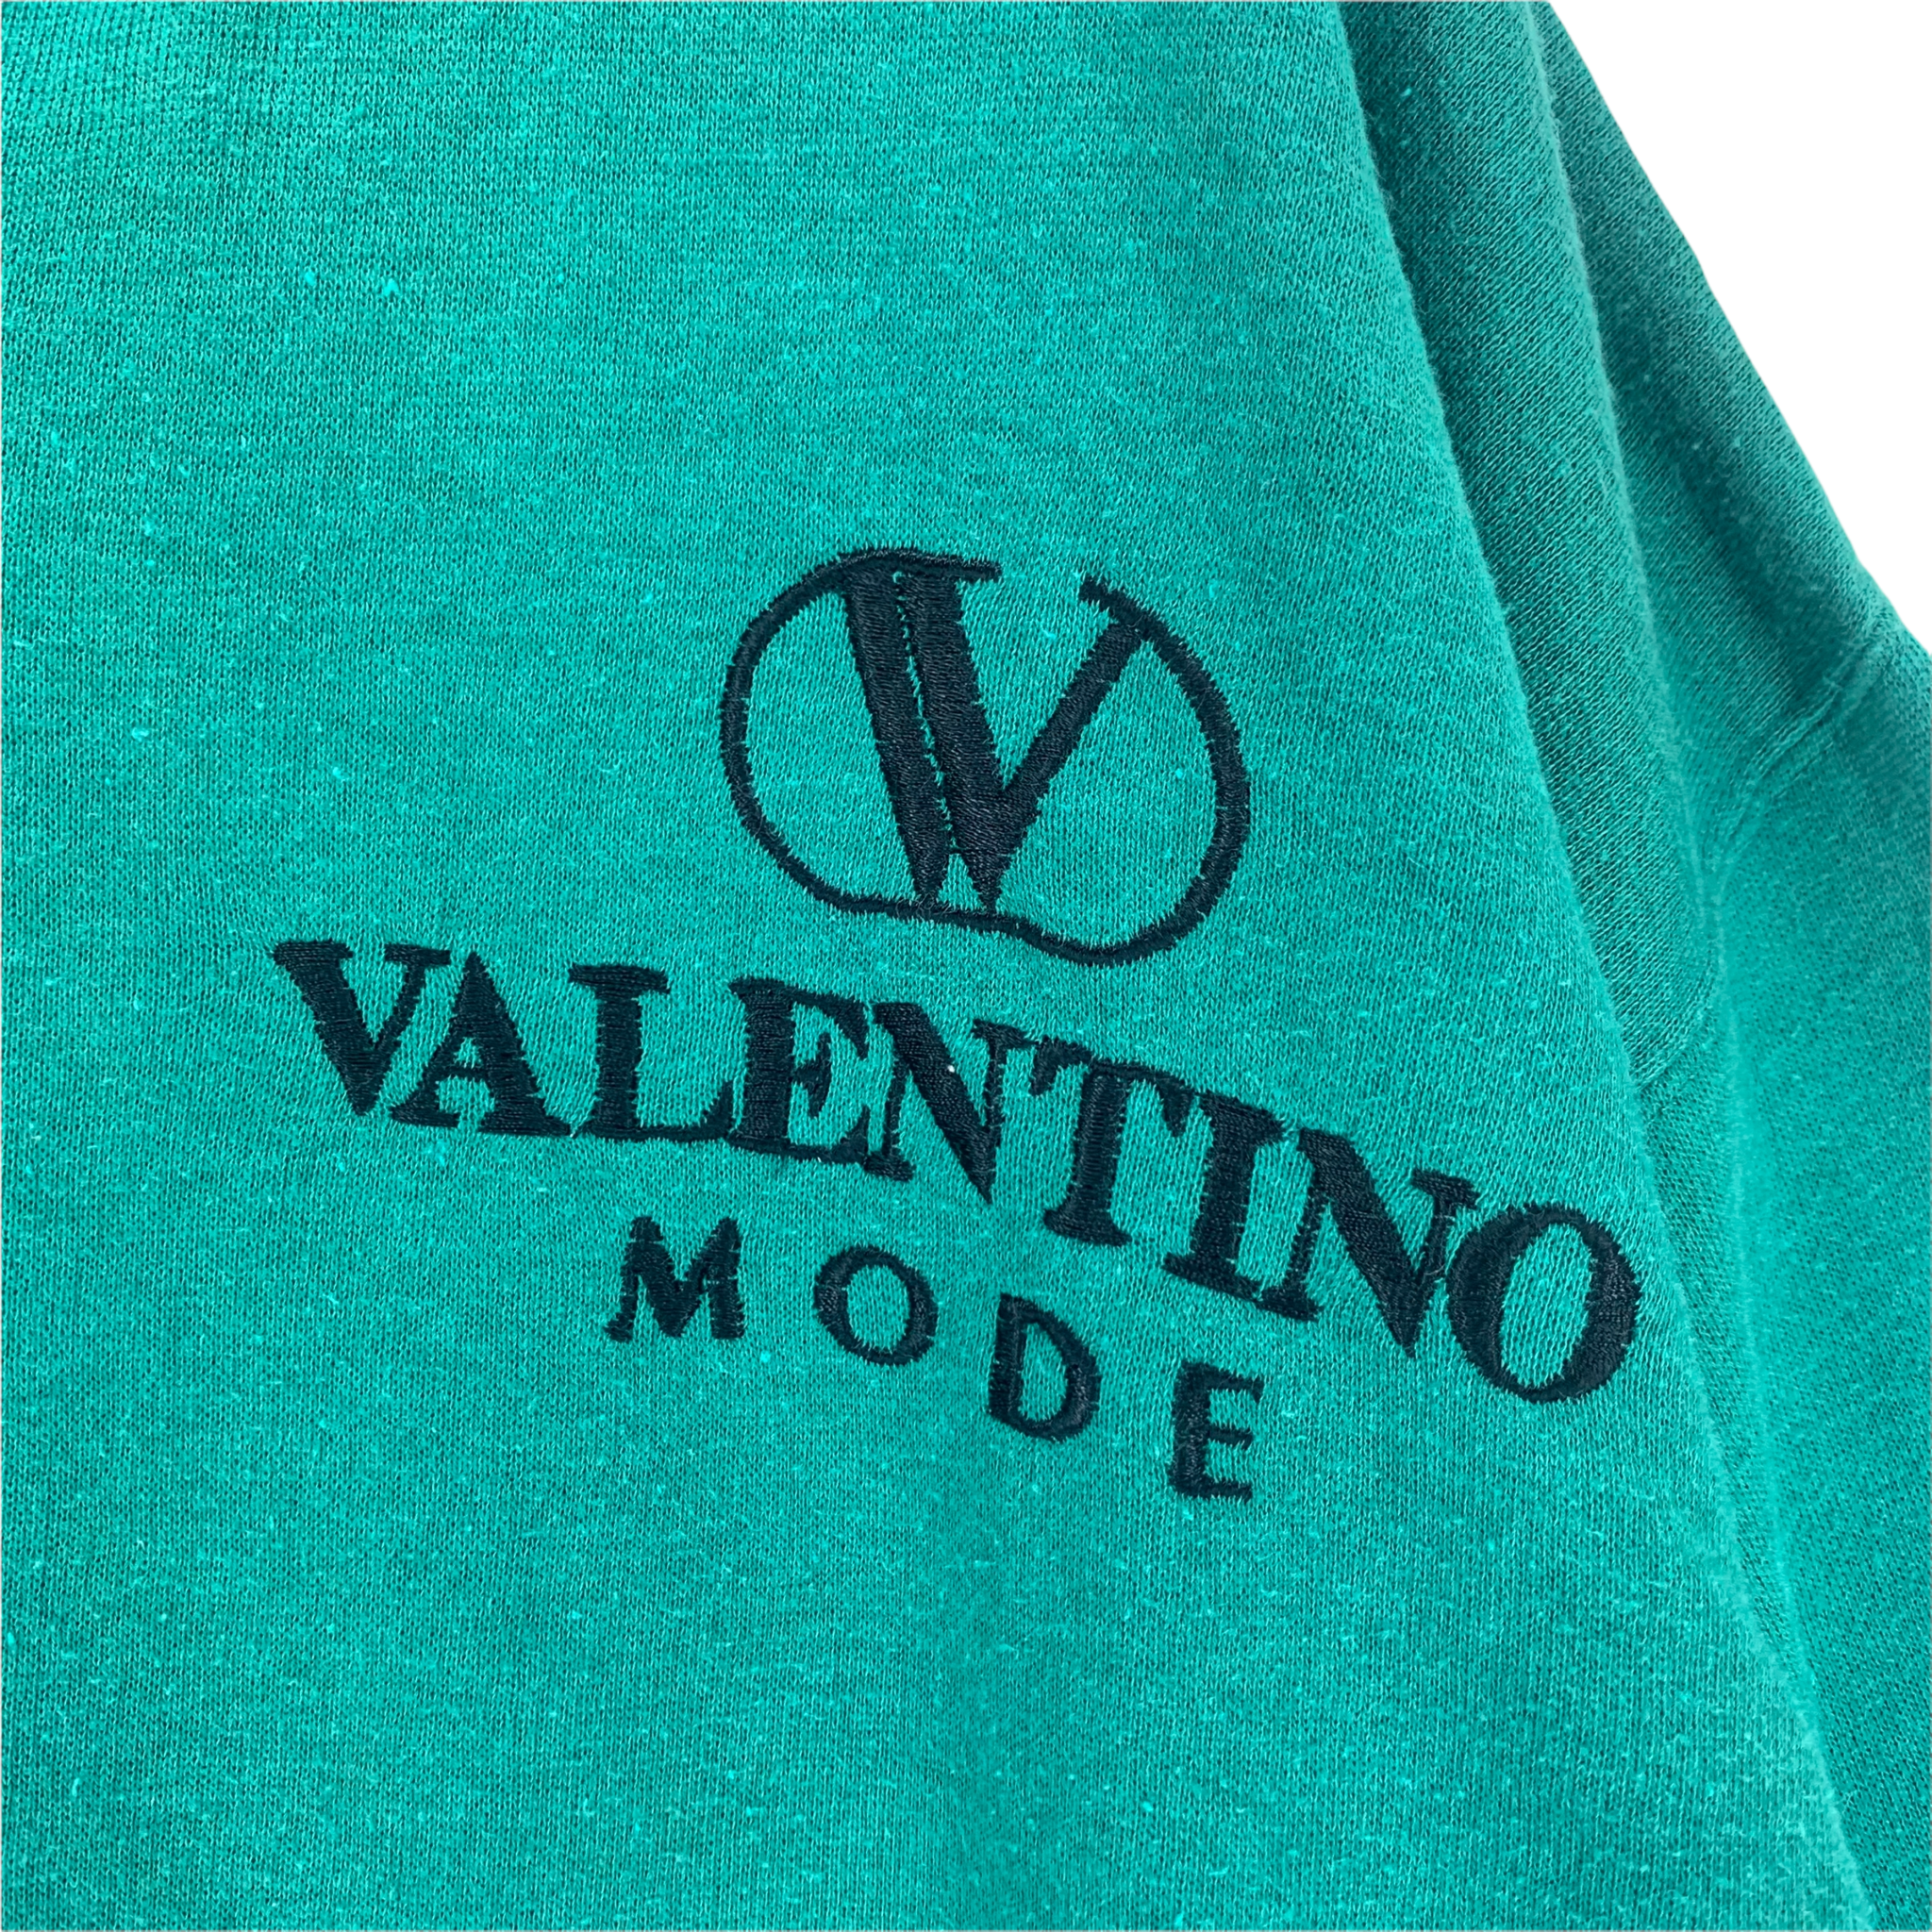 Valentino Mode Pullover Green Hoodies #3471-123 - 3